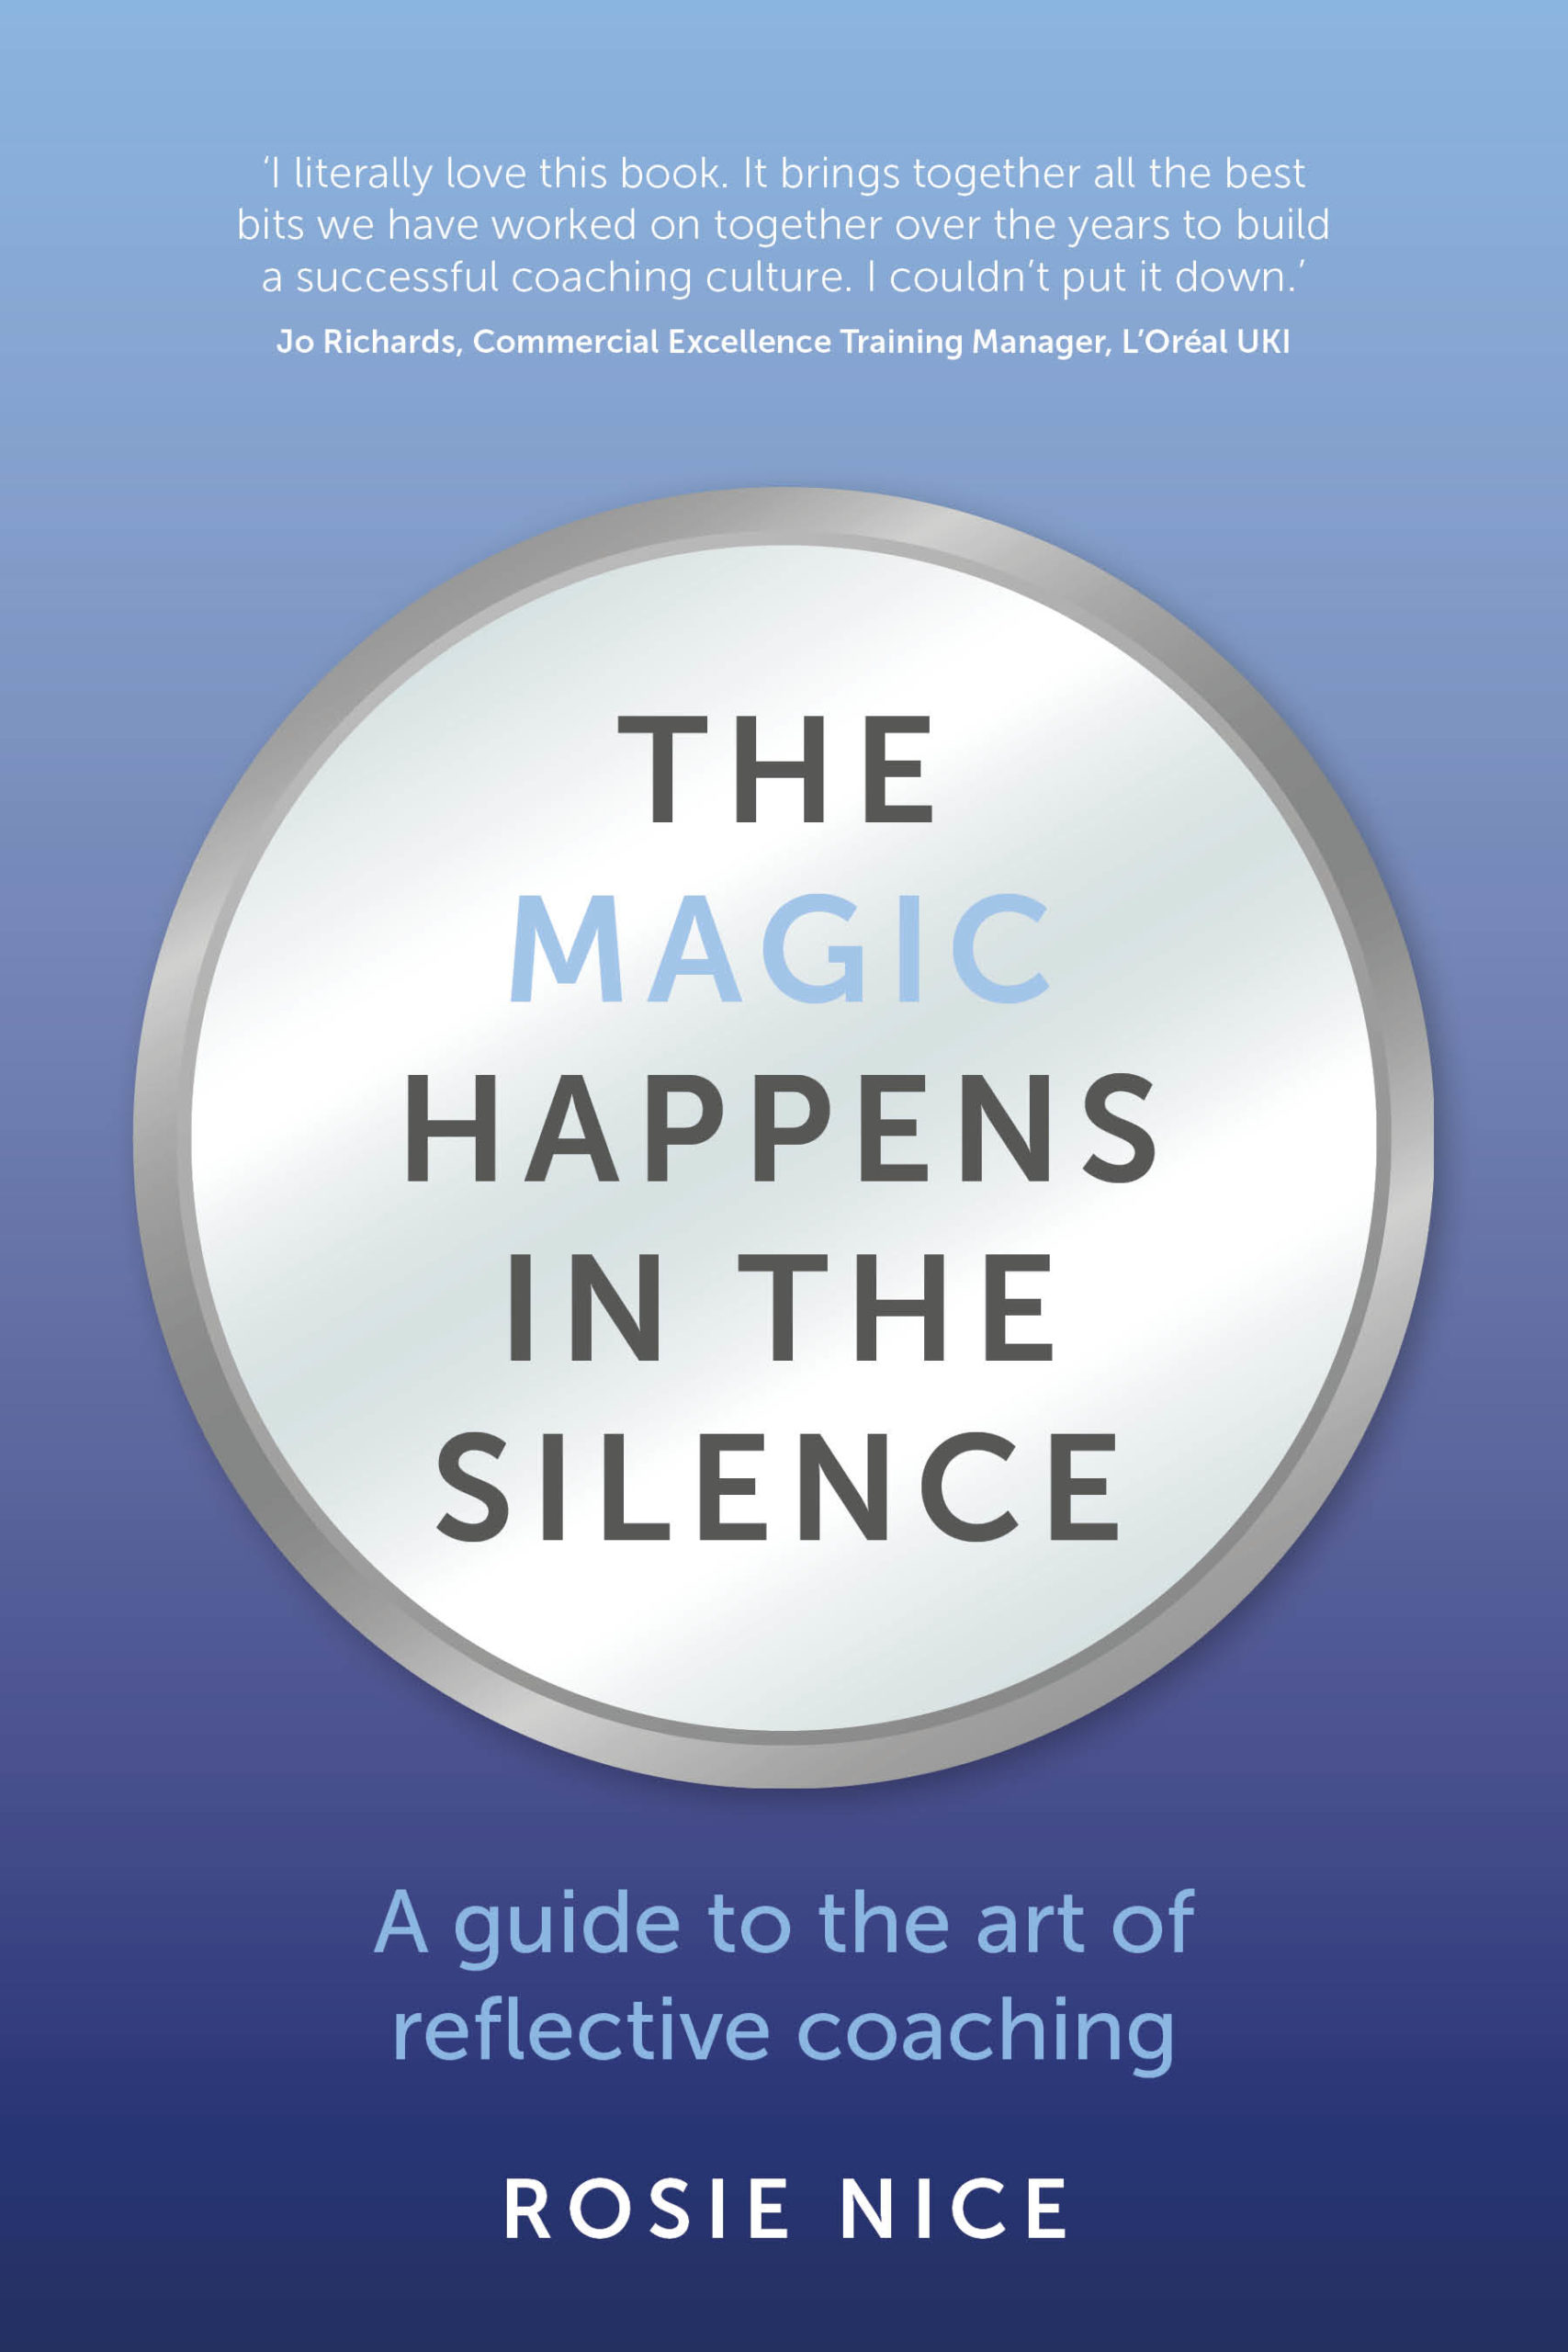 The Magic Happens in the Silence